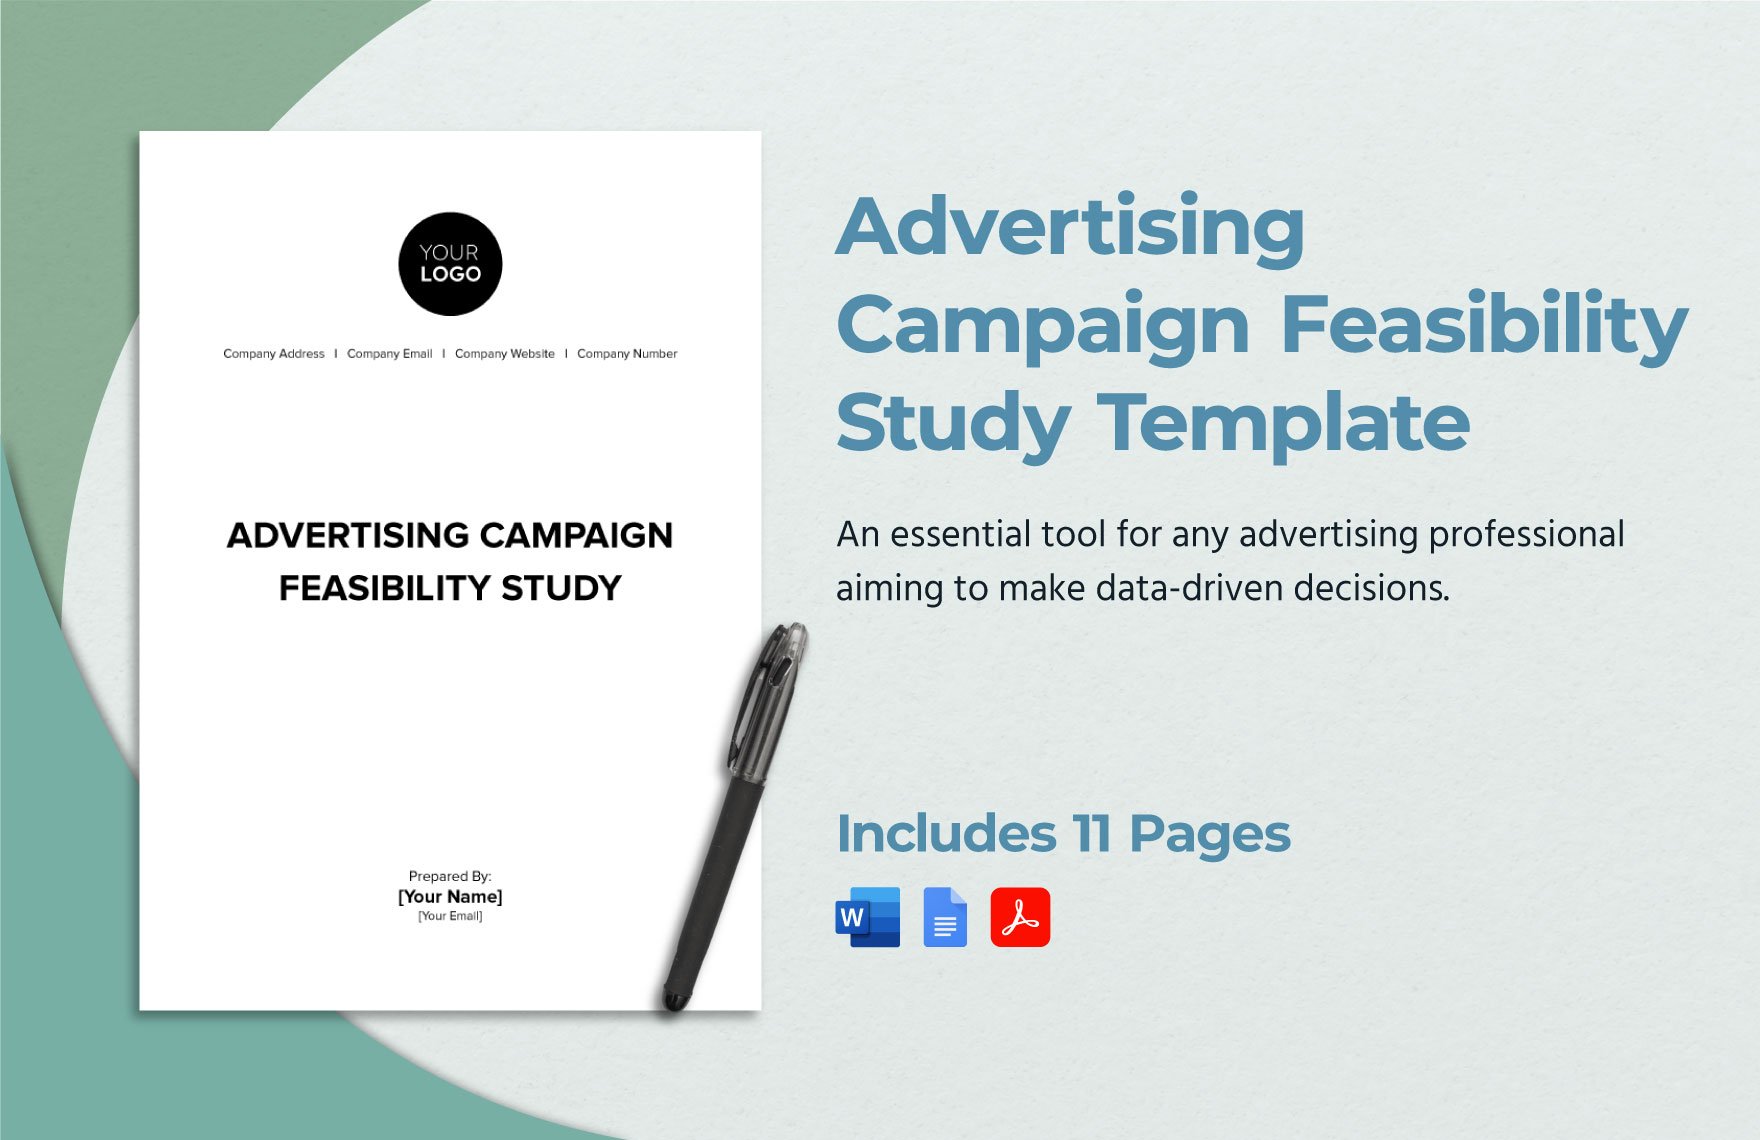 Advertising Campaign Feasibility Study Template